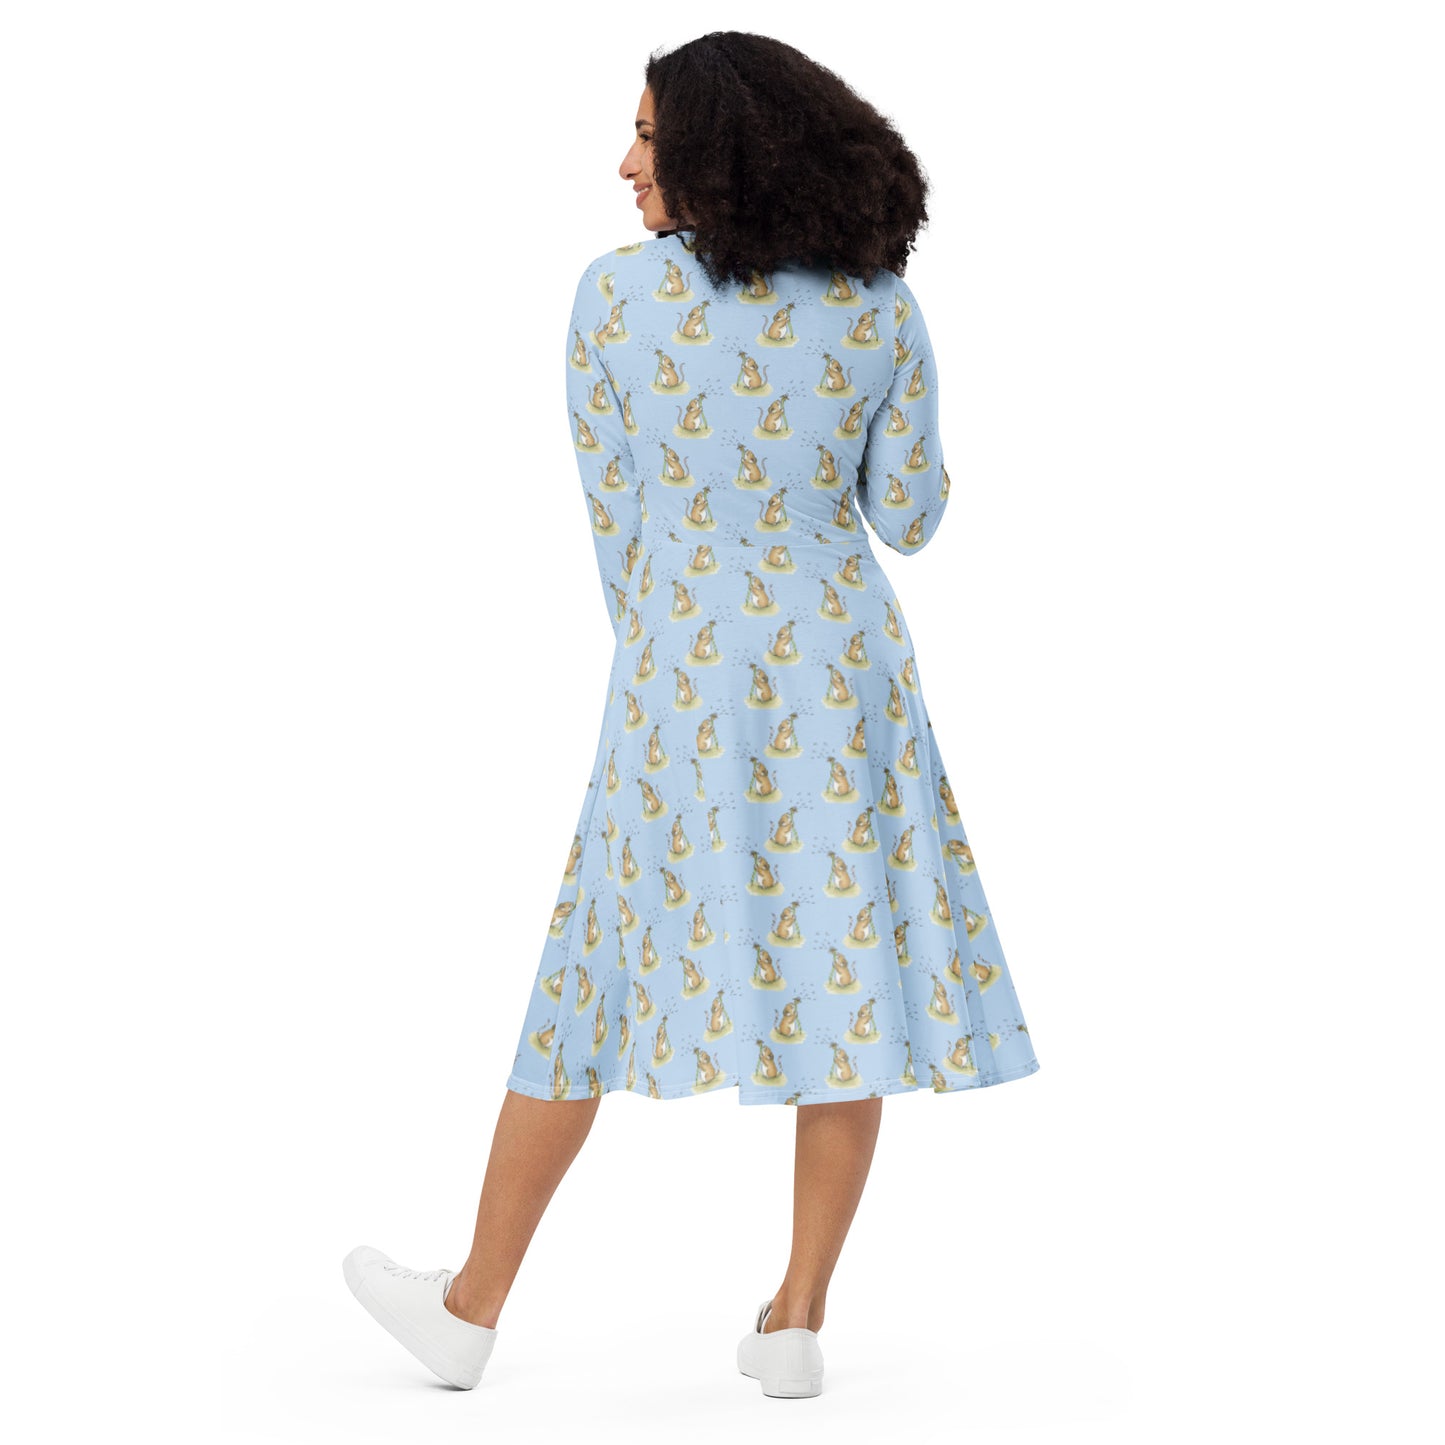 Dandelion Wish patterned long sleeve midi dress. Features patterned design of a mouse making a wish on a dandelion fluff against a light blue background. Dress has boat neckline, fitted waist, flared bottom, and side pockets. Shows back view on female model.